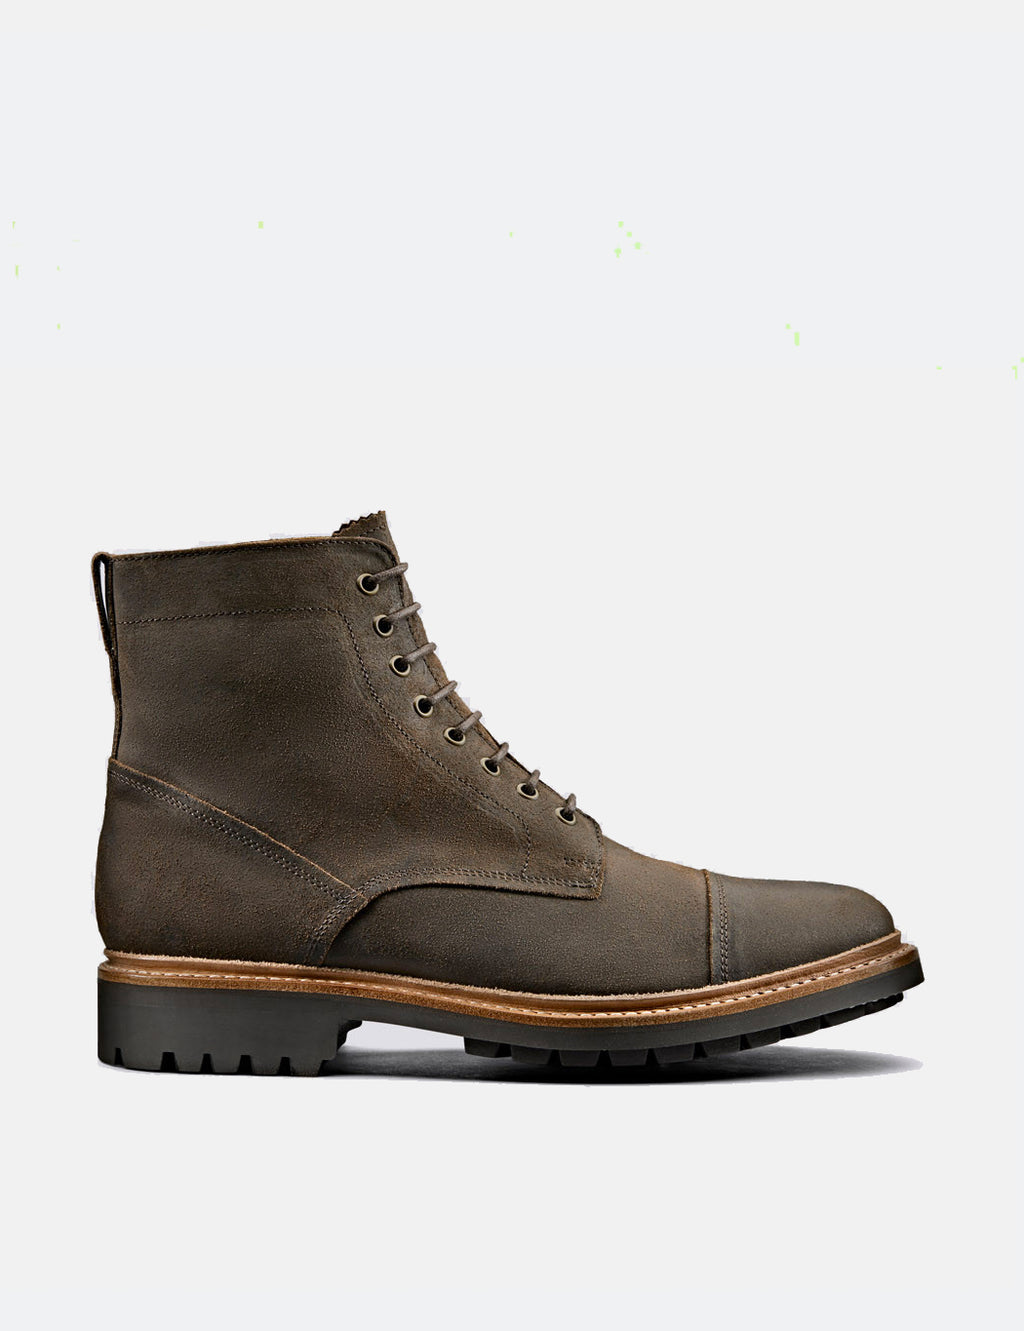 Grenson Joseph Boot (Rugged Suede) - Brown I URBAN EXCESS.